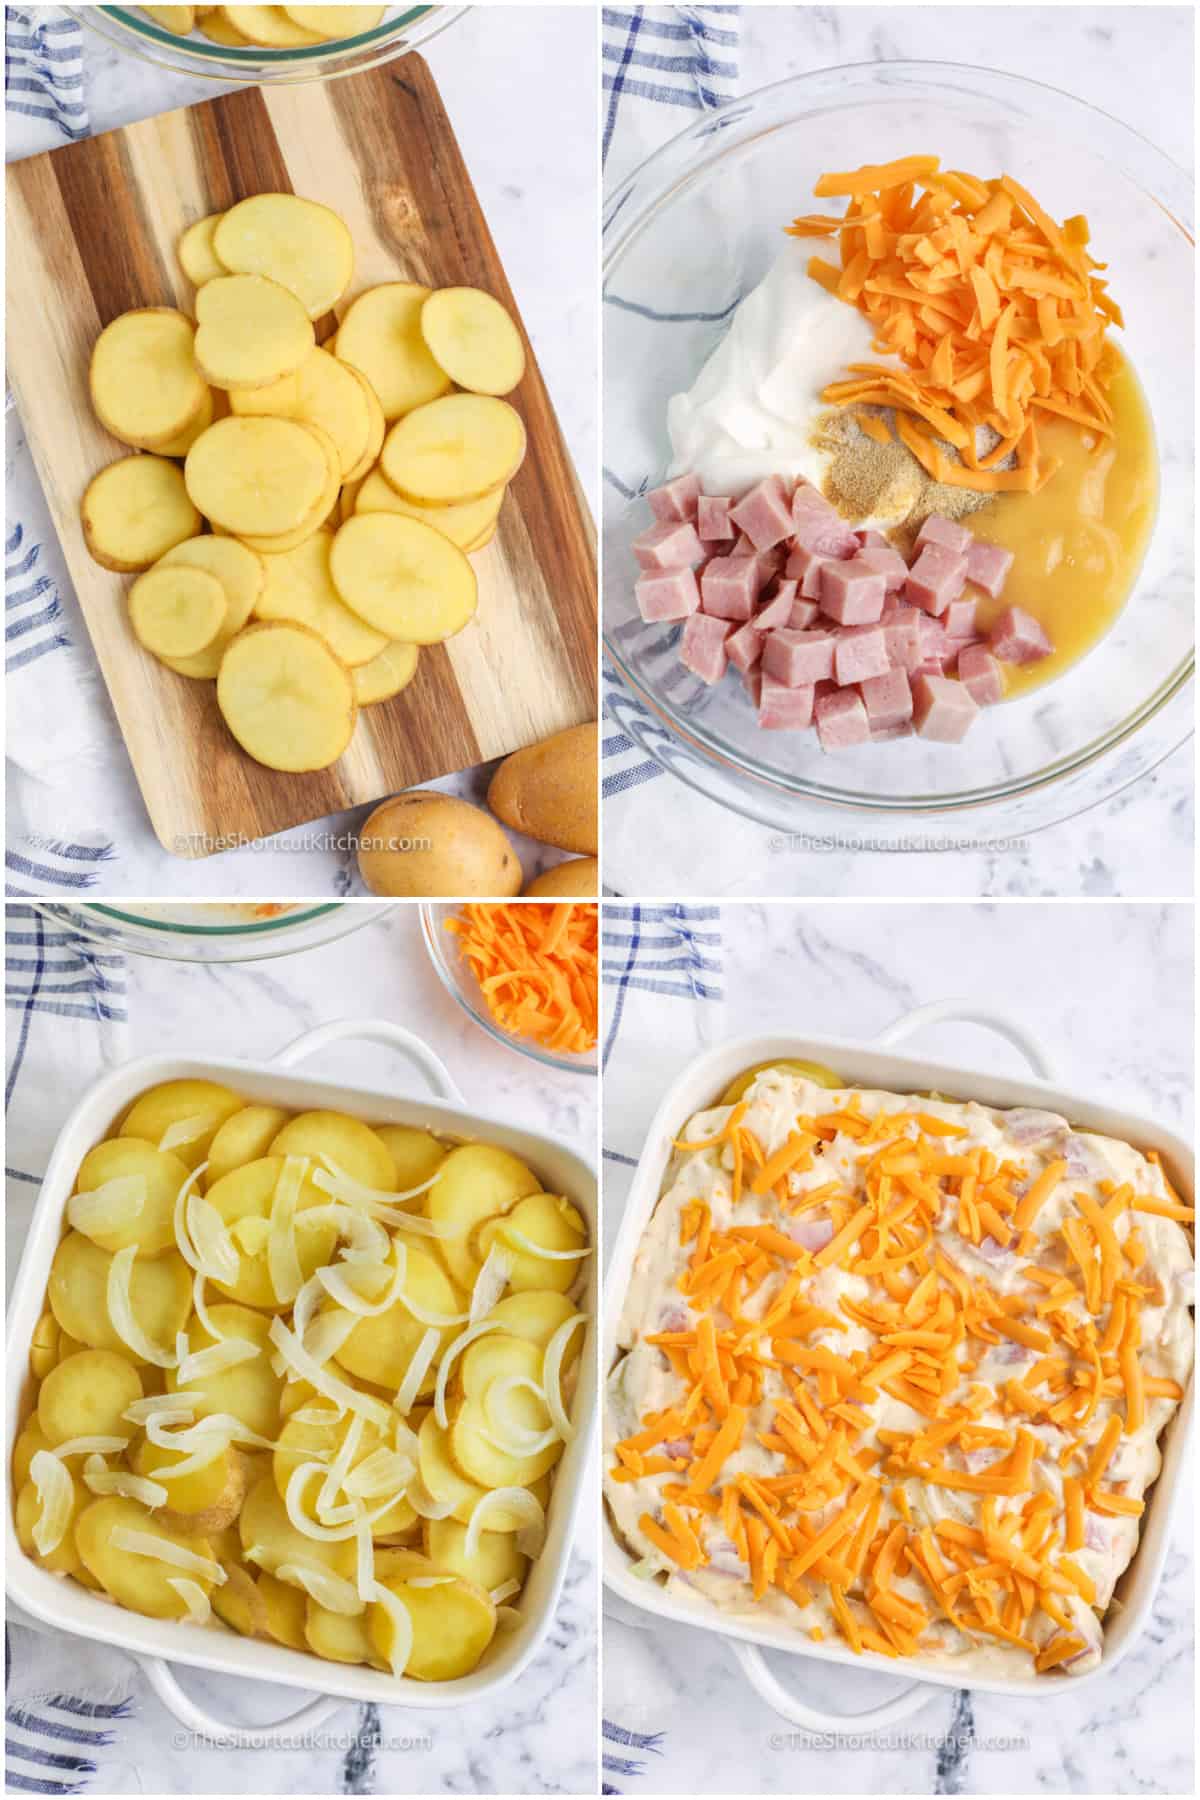 process to assemble Easy Scalloped Potatoes and Ham